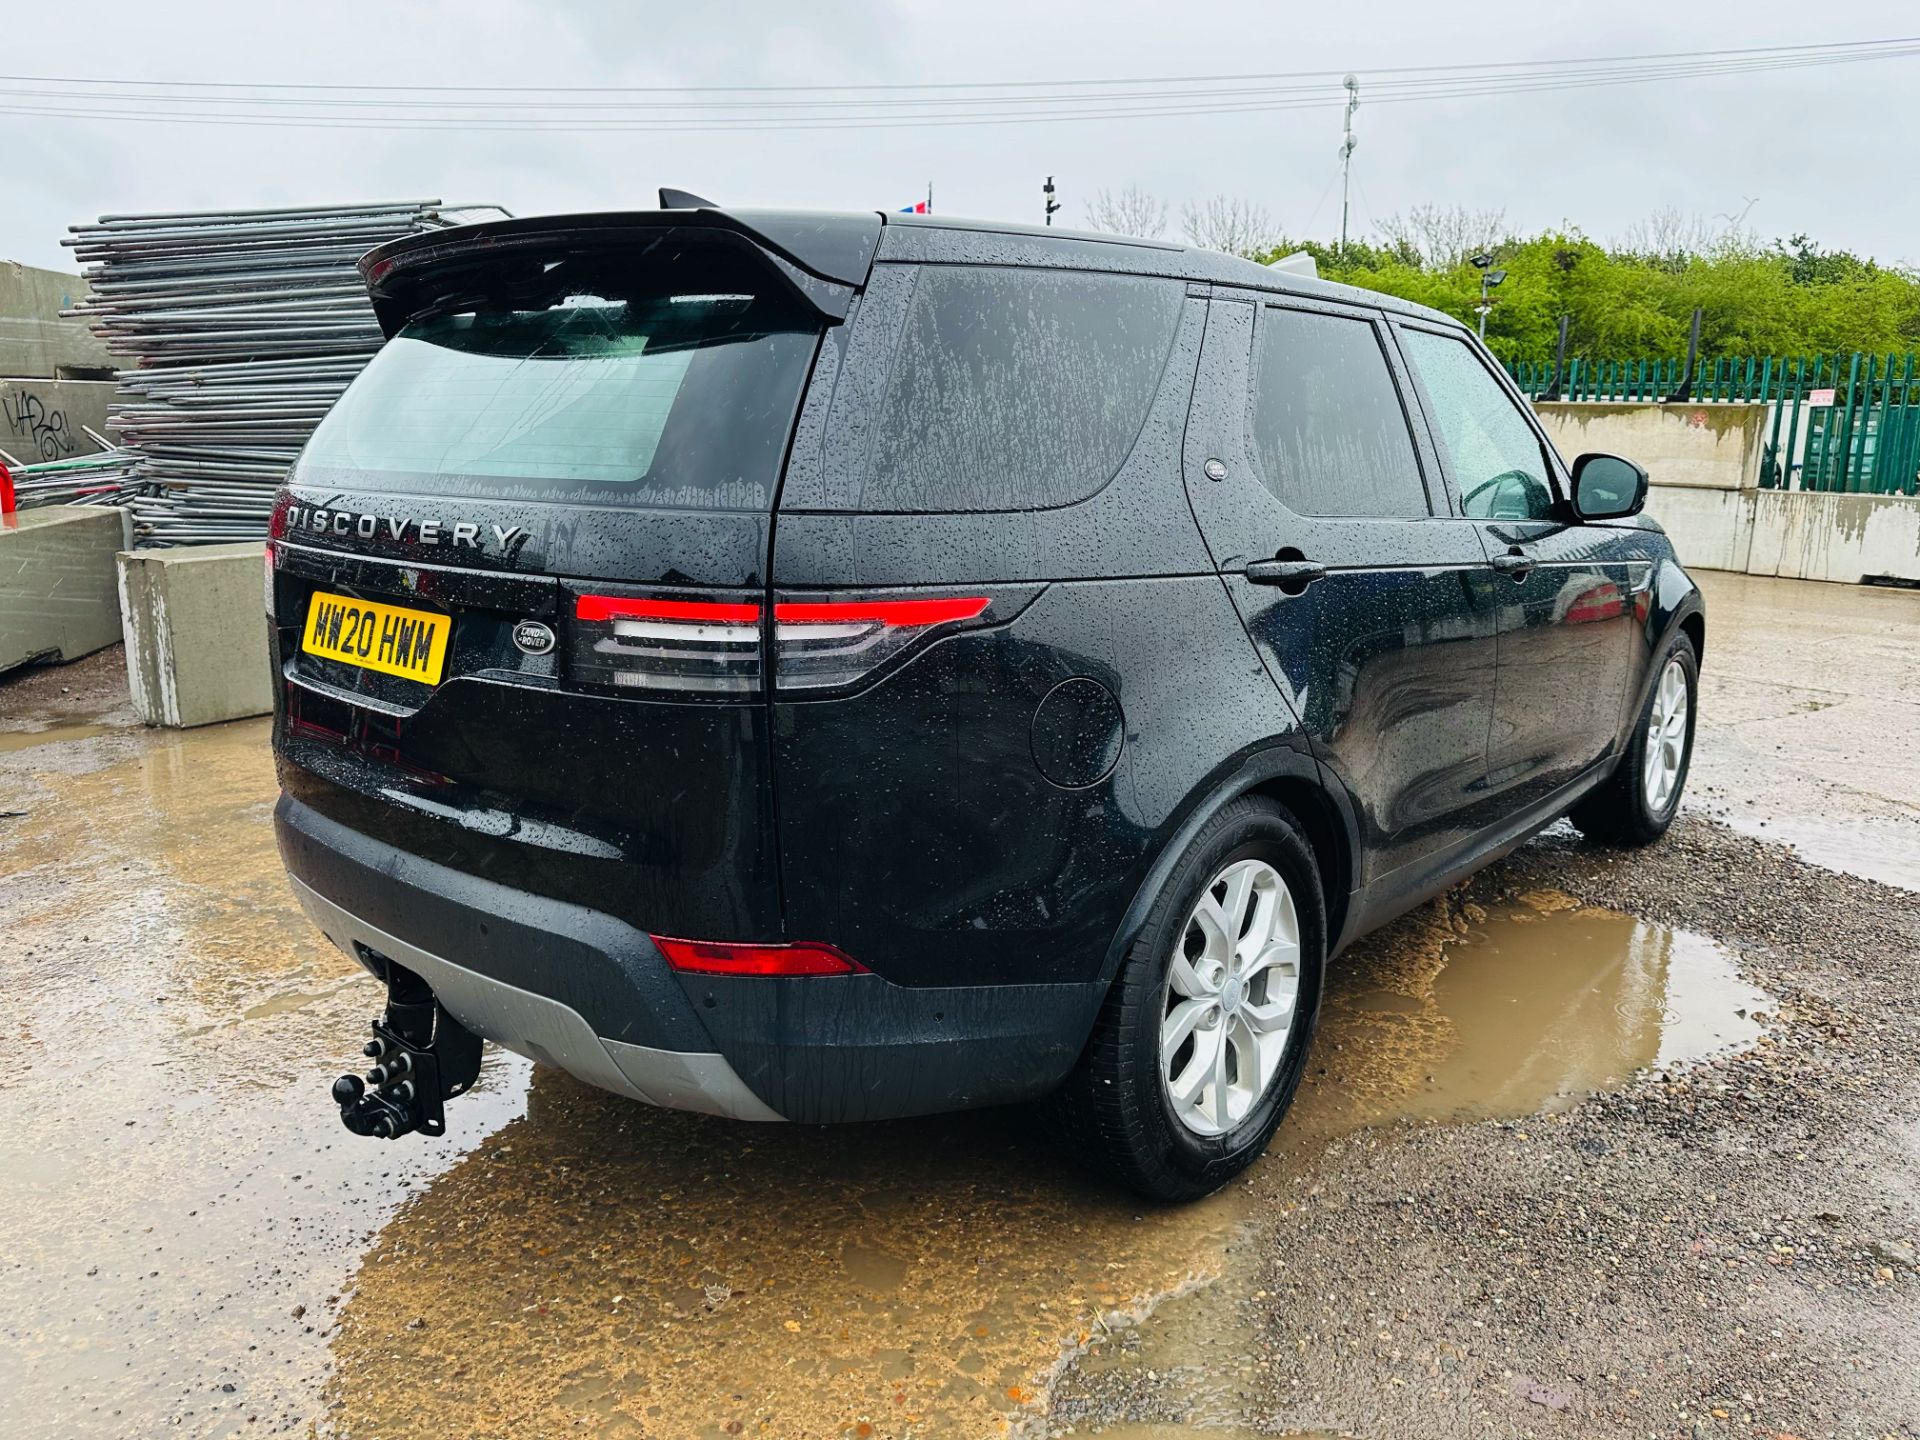 (Reserve Met) Land Rover Discovery SE Automatic (Black Edition) - 2020 Model - Only 57k Miles! - Image 9 of 40